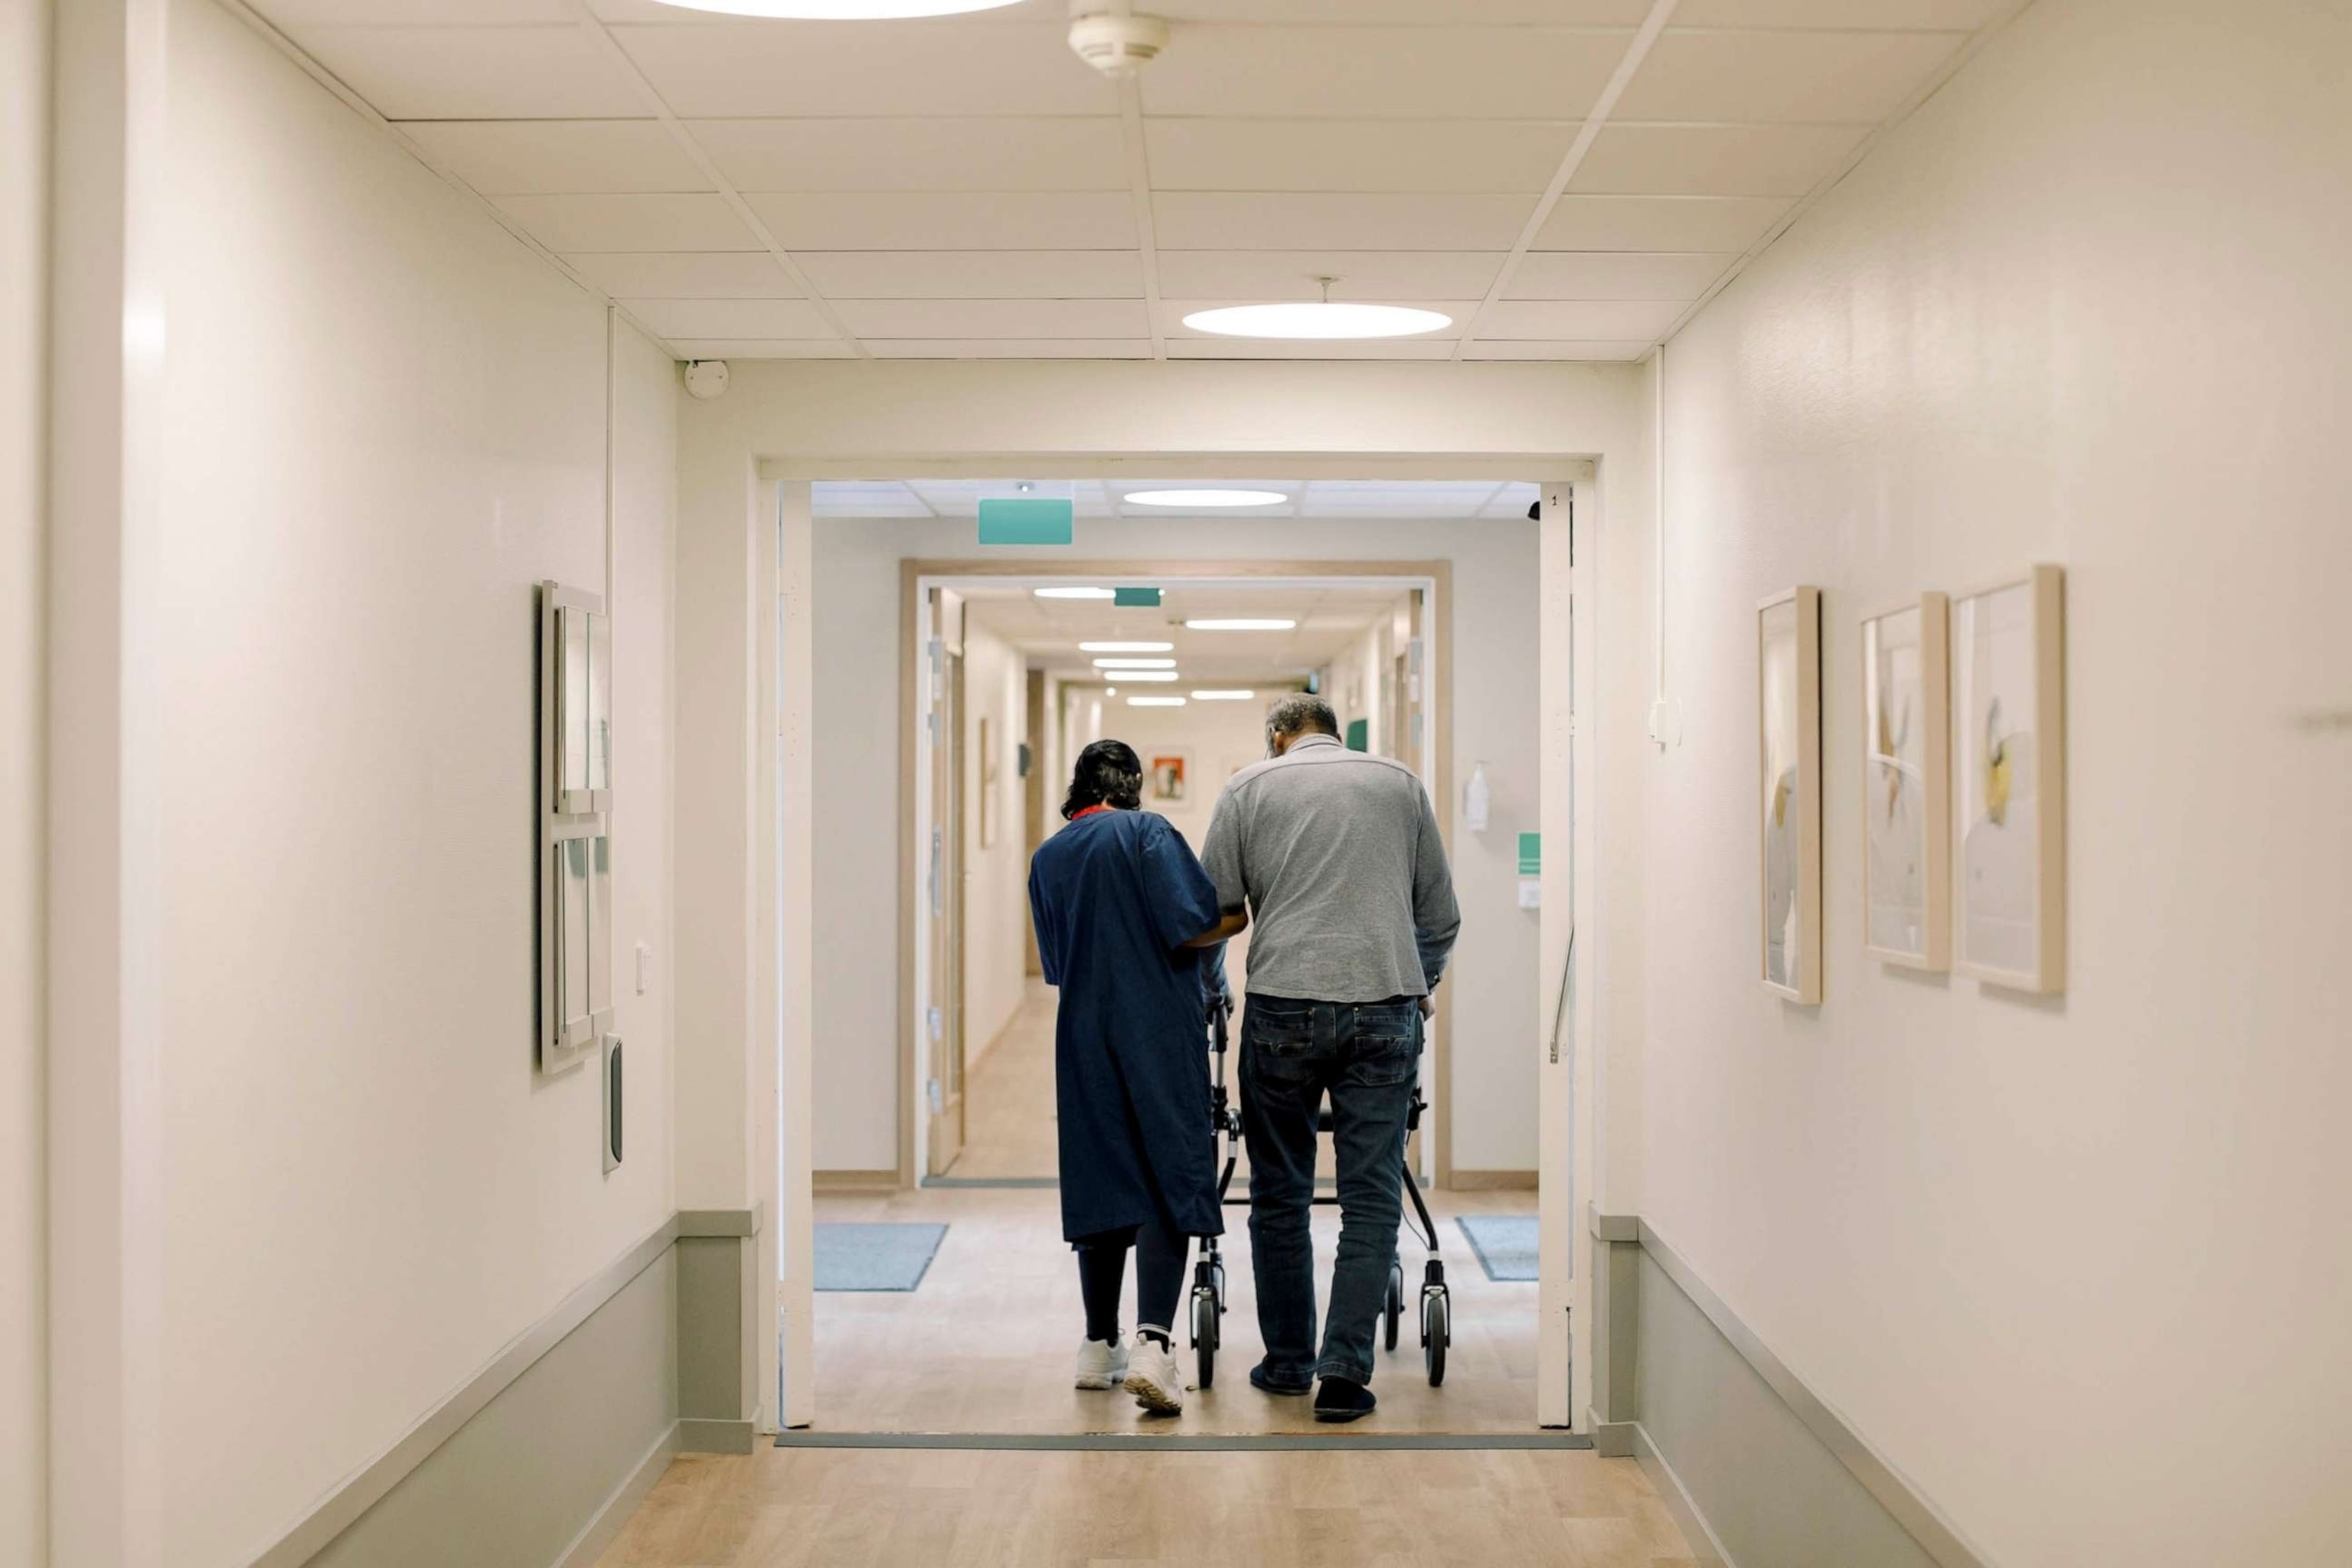 STOCK PHOTO: In this undated stock photo, an elderly man is being walked down a nursing home hall by a nurse.